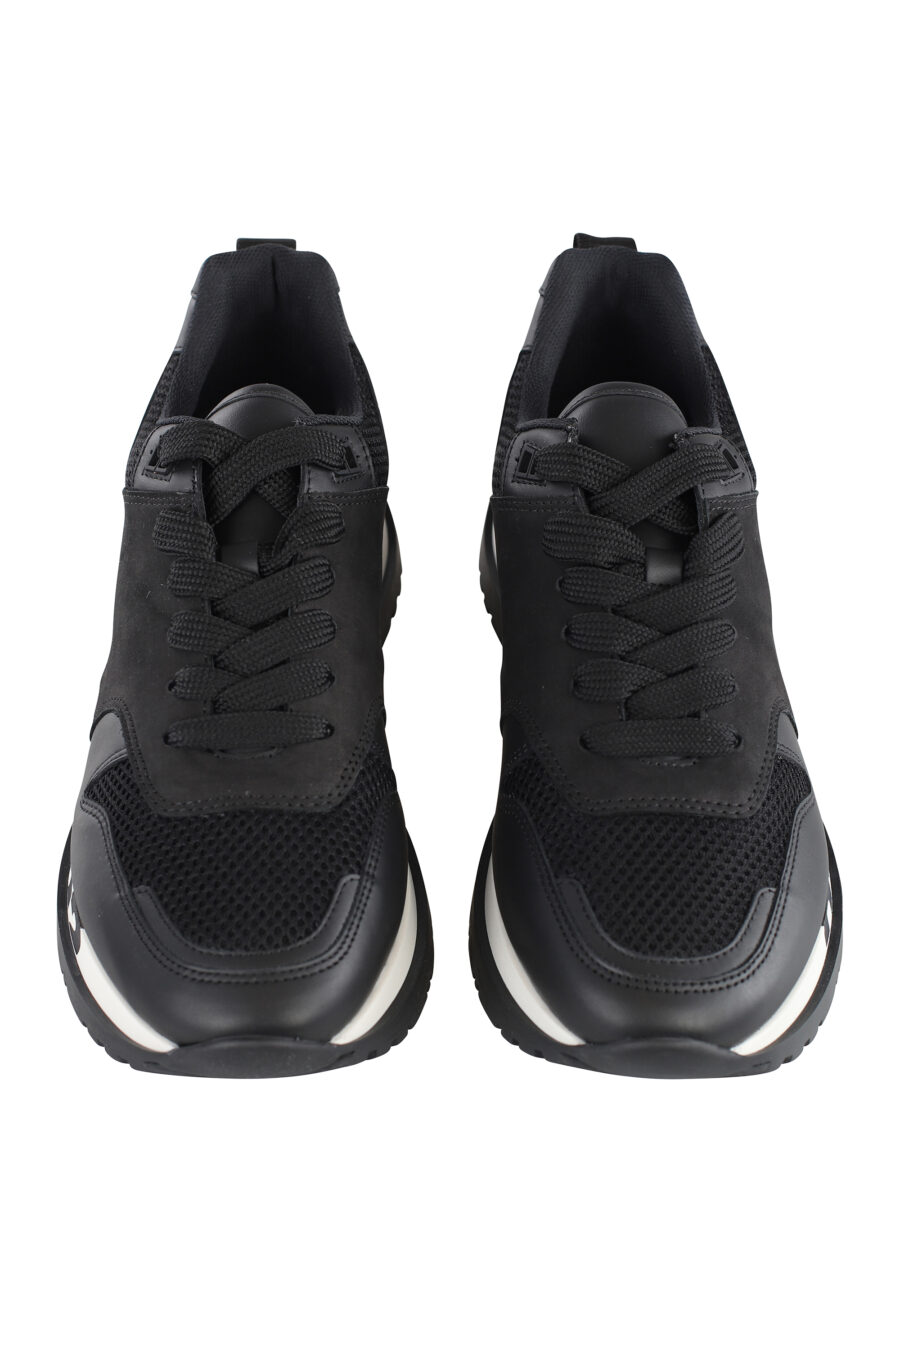 Black trainers with logo on sole - IMG 7094